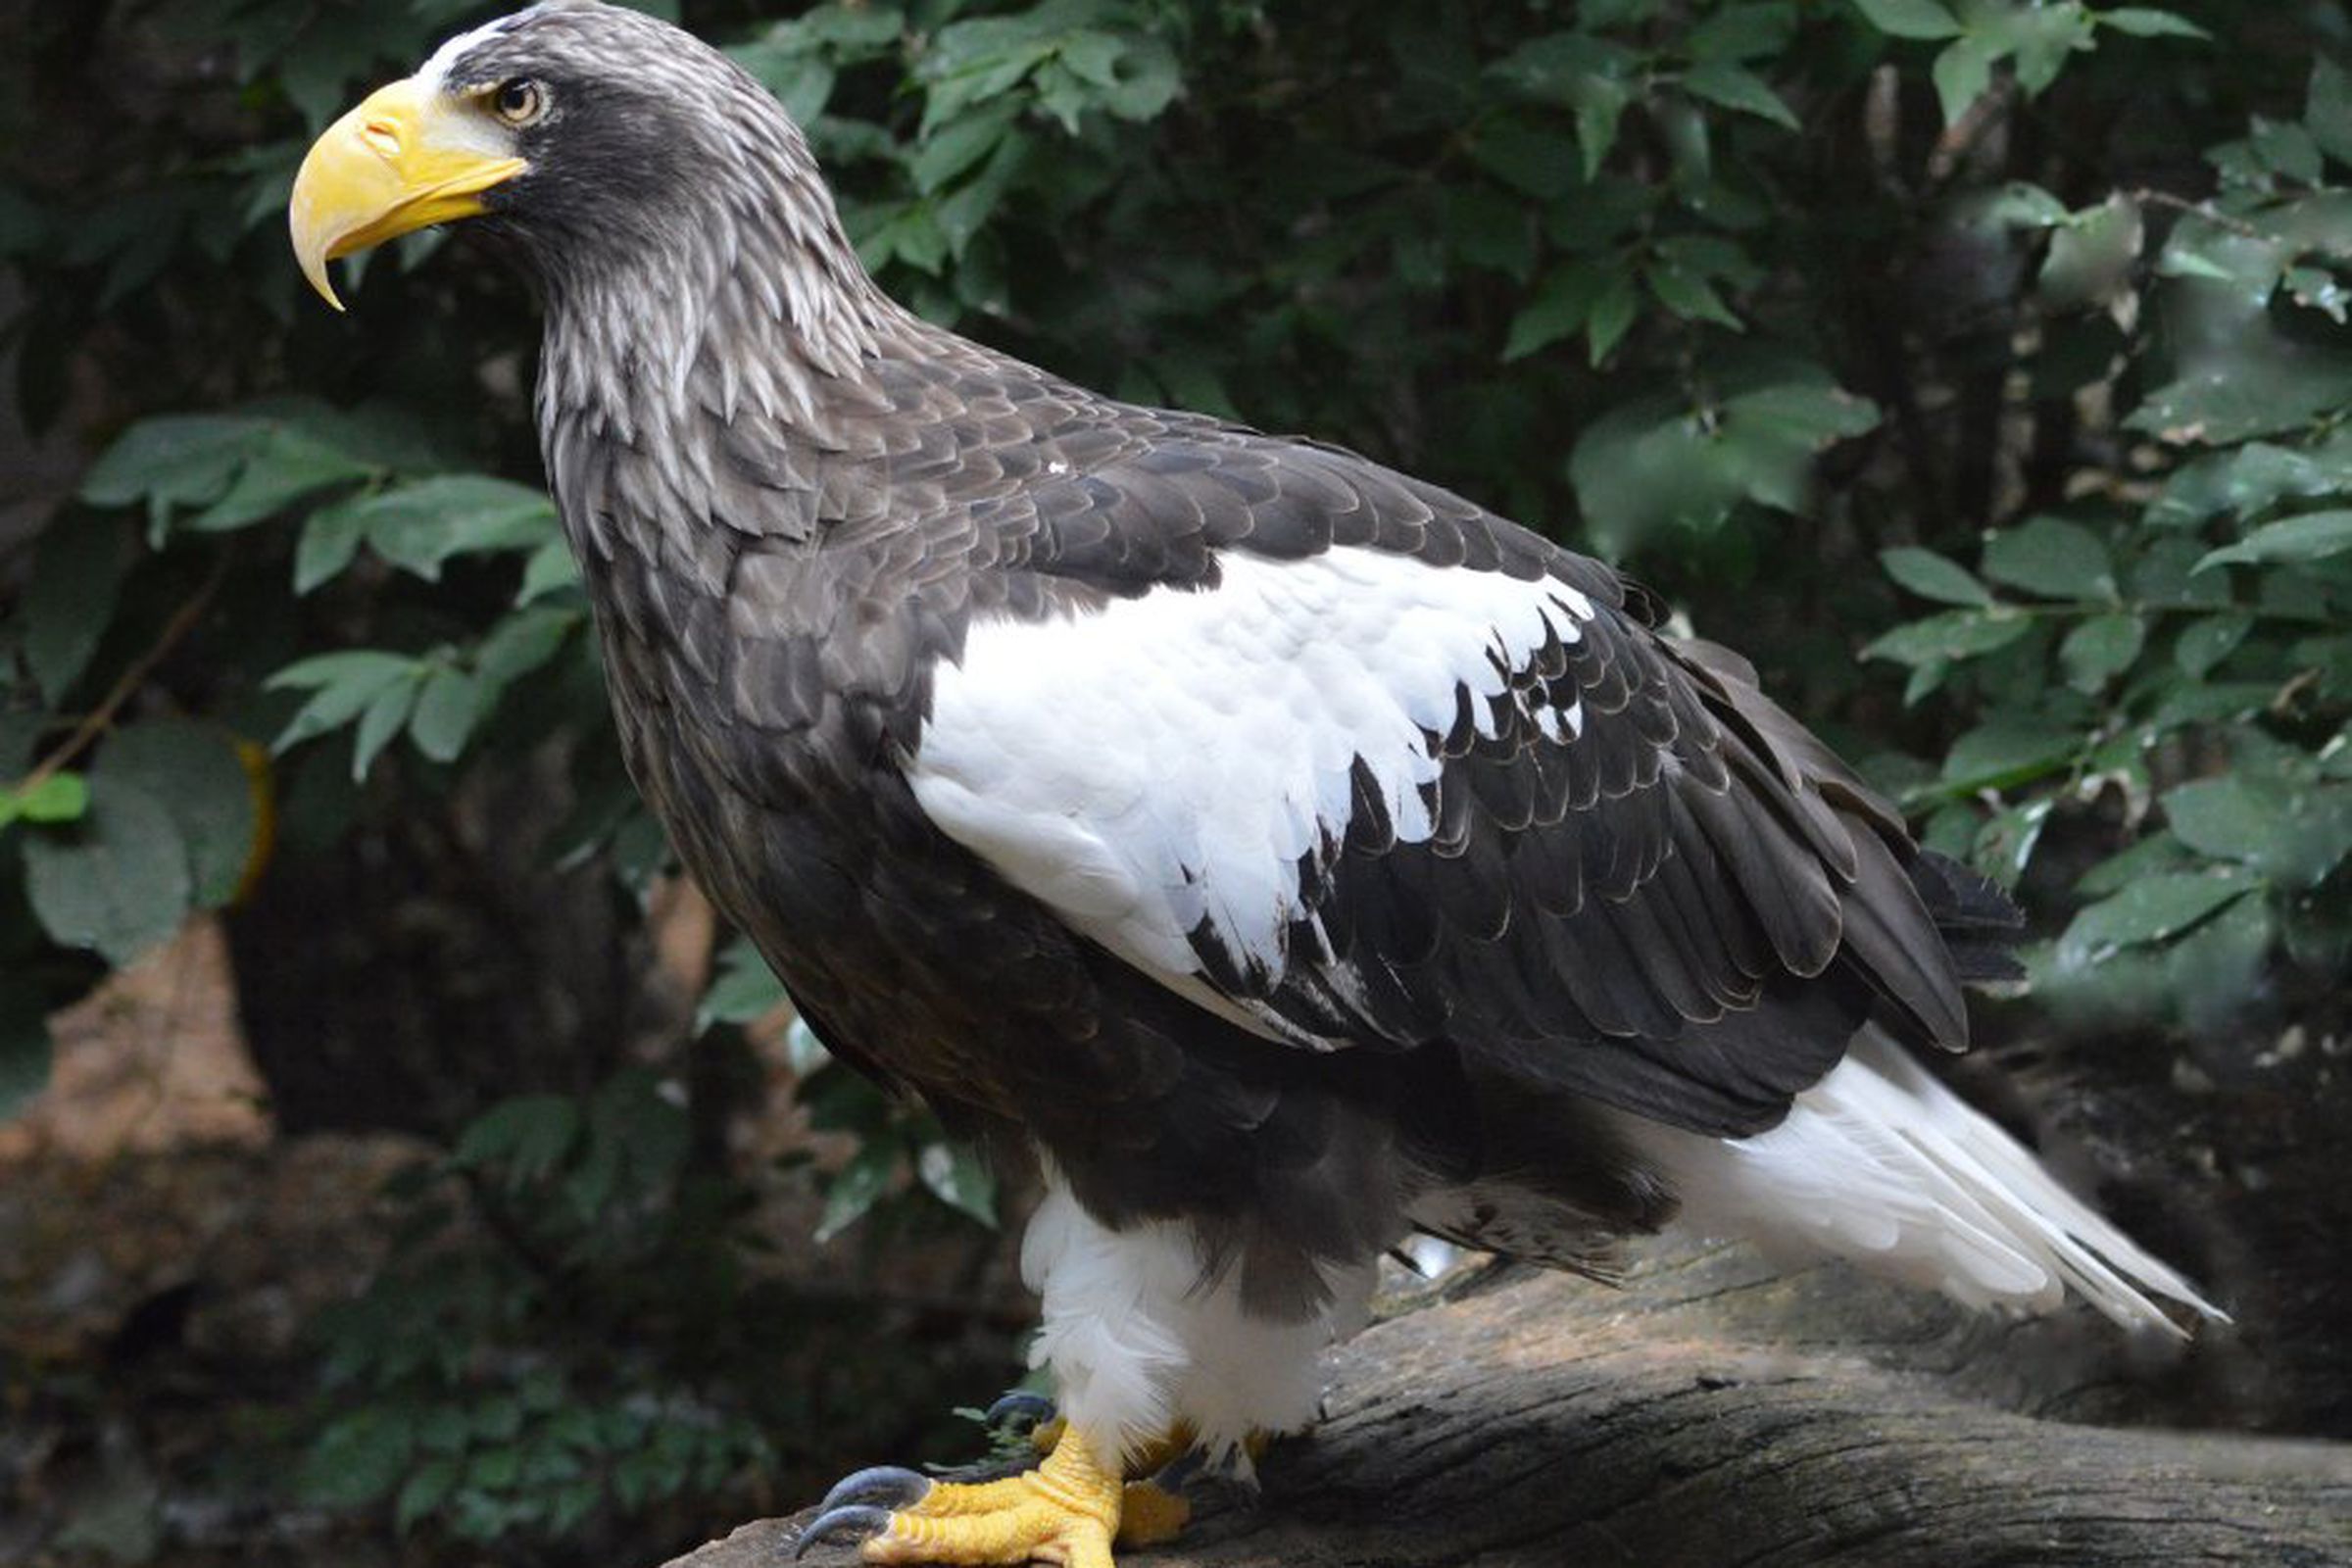 Kodiak (Kody) the Steller’s sea eagle, who escaped the National Aviary in Pittsburgh September 29th